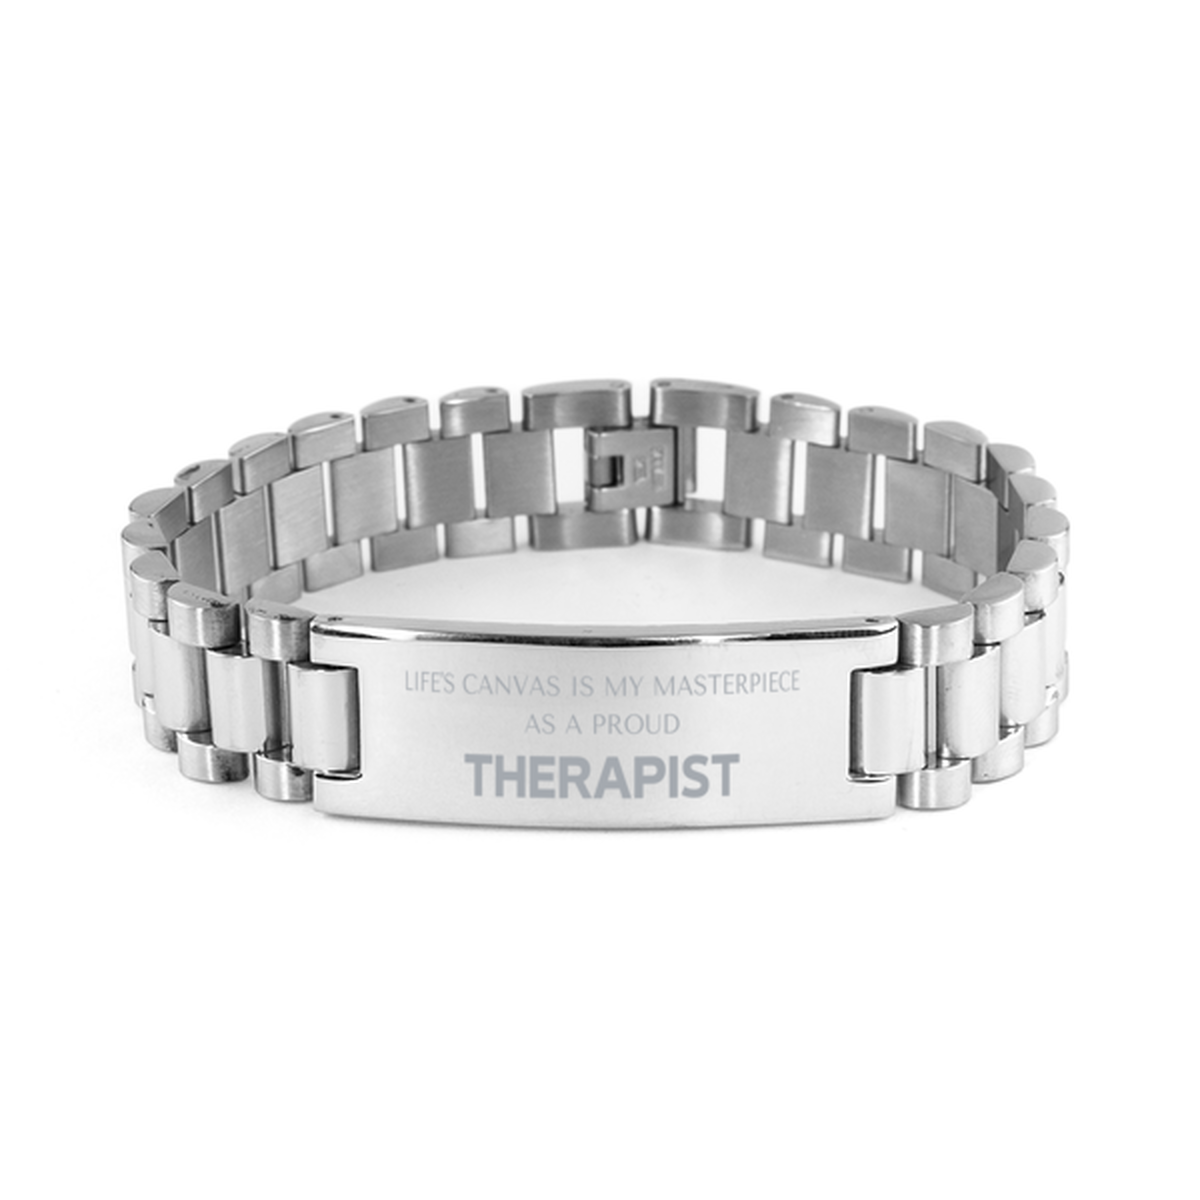 Proud Therapist Gifts, Life's canvas is my masterpiece, Epic Birthday Christmas Unique Ladder Stainless Steel Bracelet For Therapist, Coworkers, Men, Women, Friends